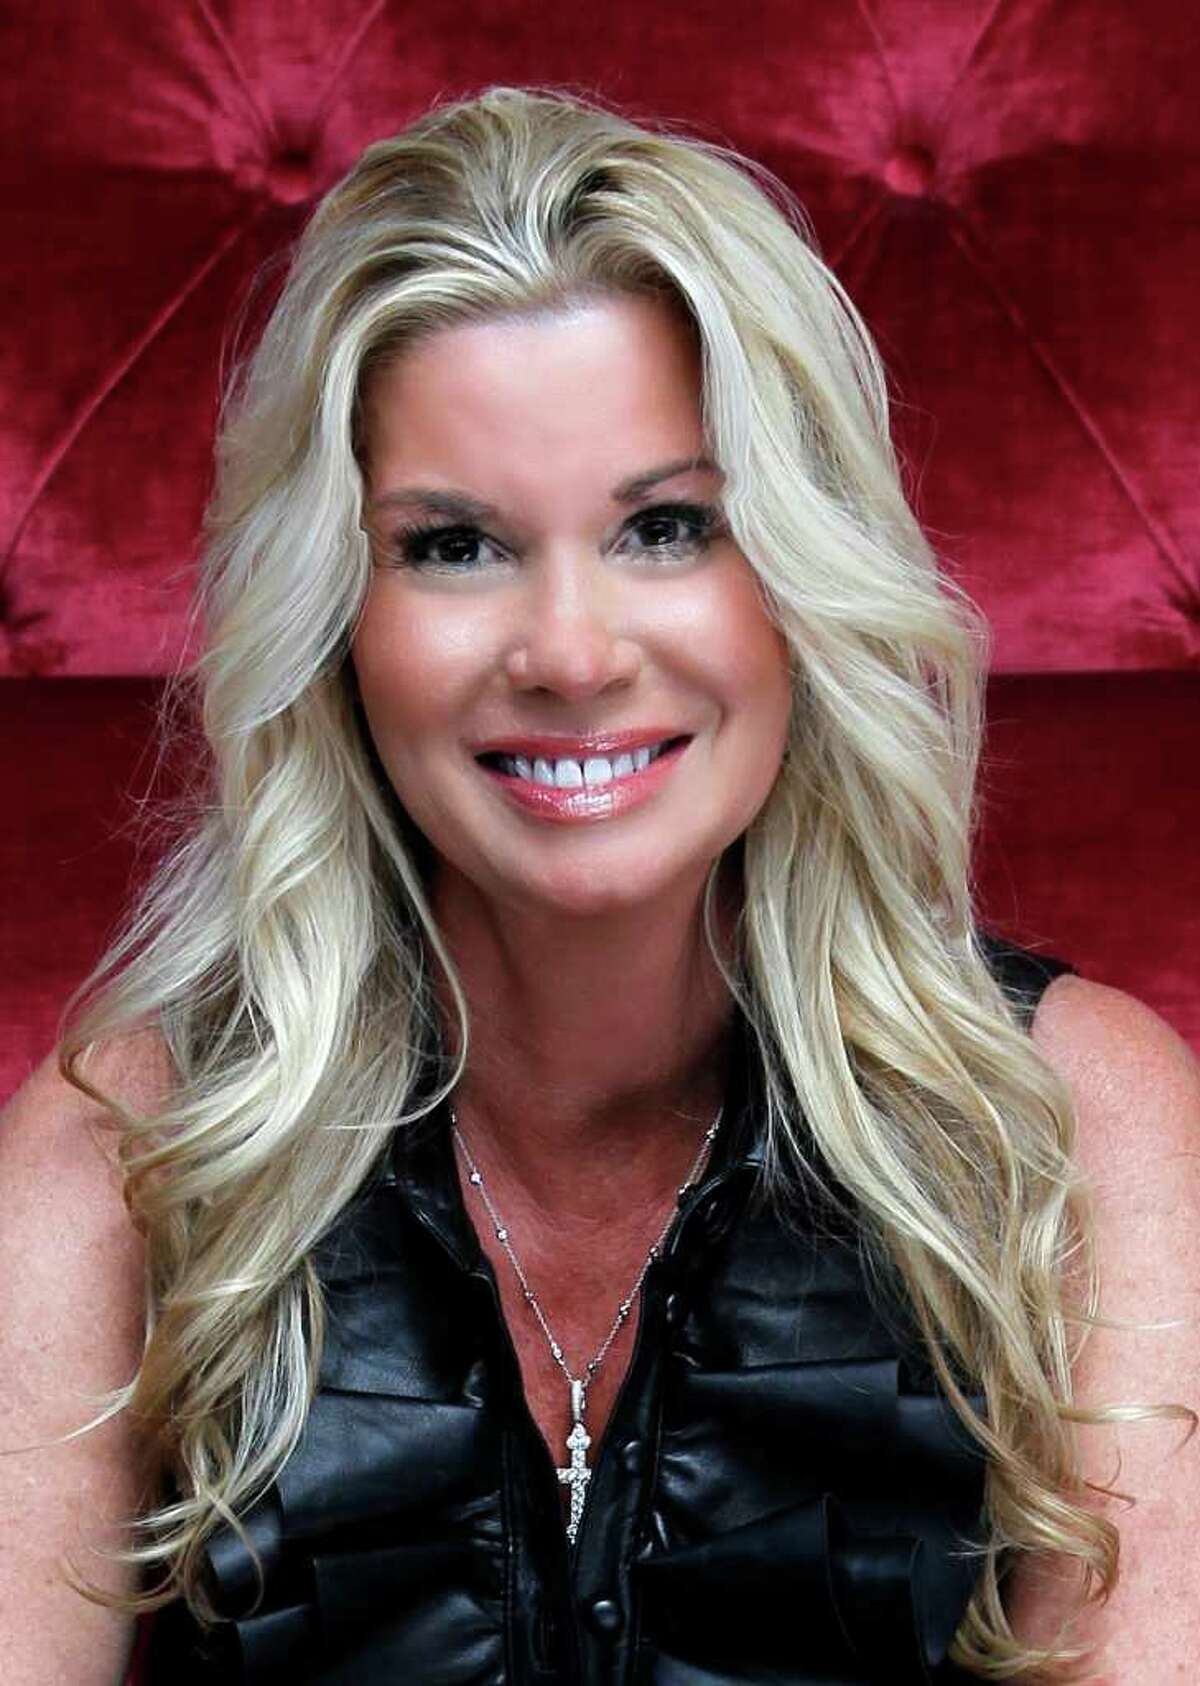 Dallas native Kim Gatlin is the author of the book"Good Christian Bitches," which has been turned into a TV show, "GCB," that will air March 5, 2012. The show will star Annie Potts, Kristin Chenoweth and Leslie Bibb.